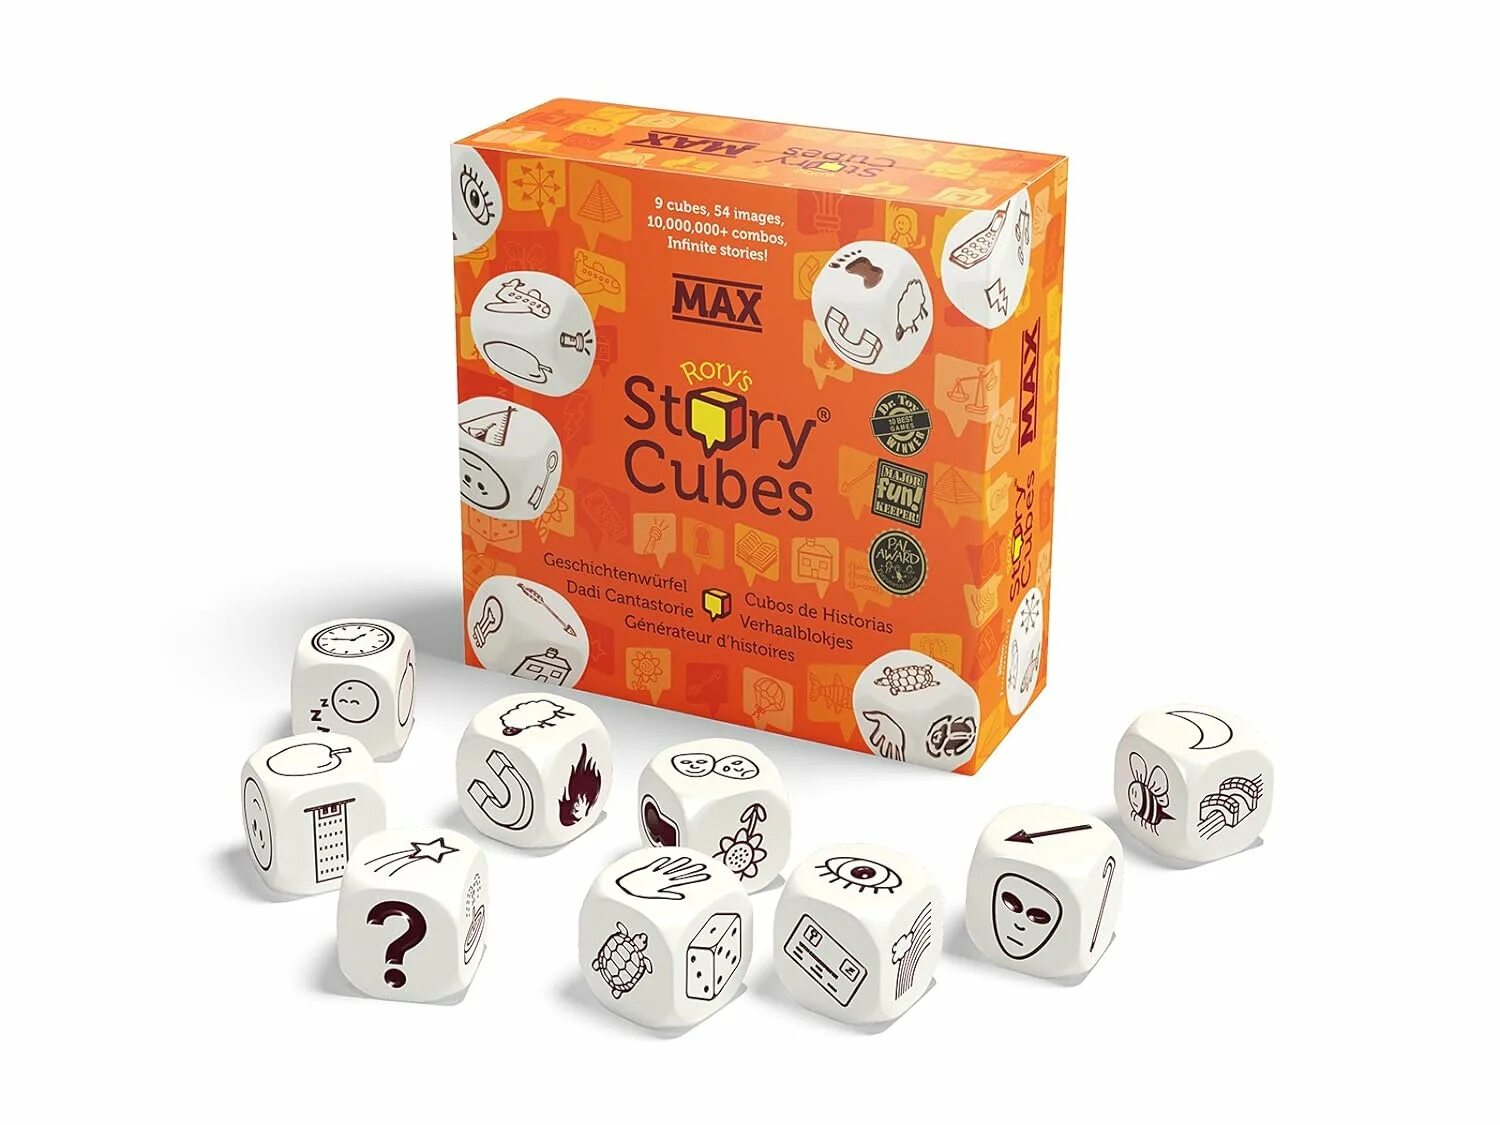 Max cubes. Игра story Cubes. Rory's story Cubes. Story Cubes картинки. Rory's story Cubes медицинский.